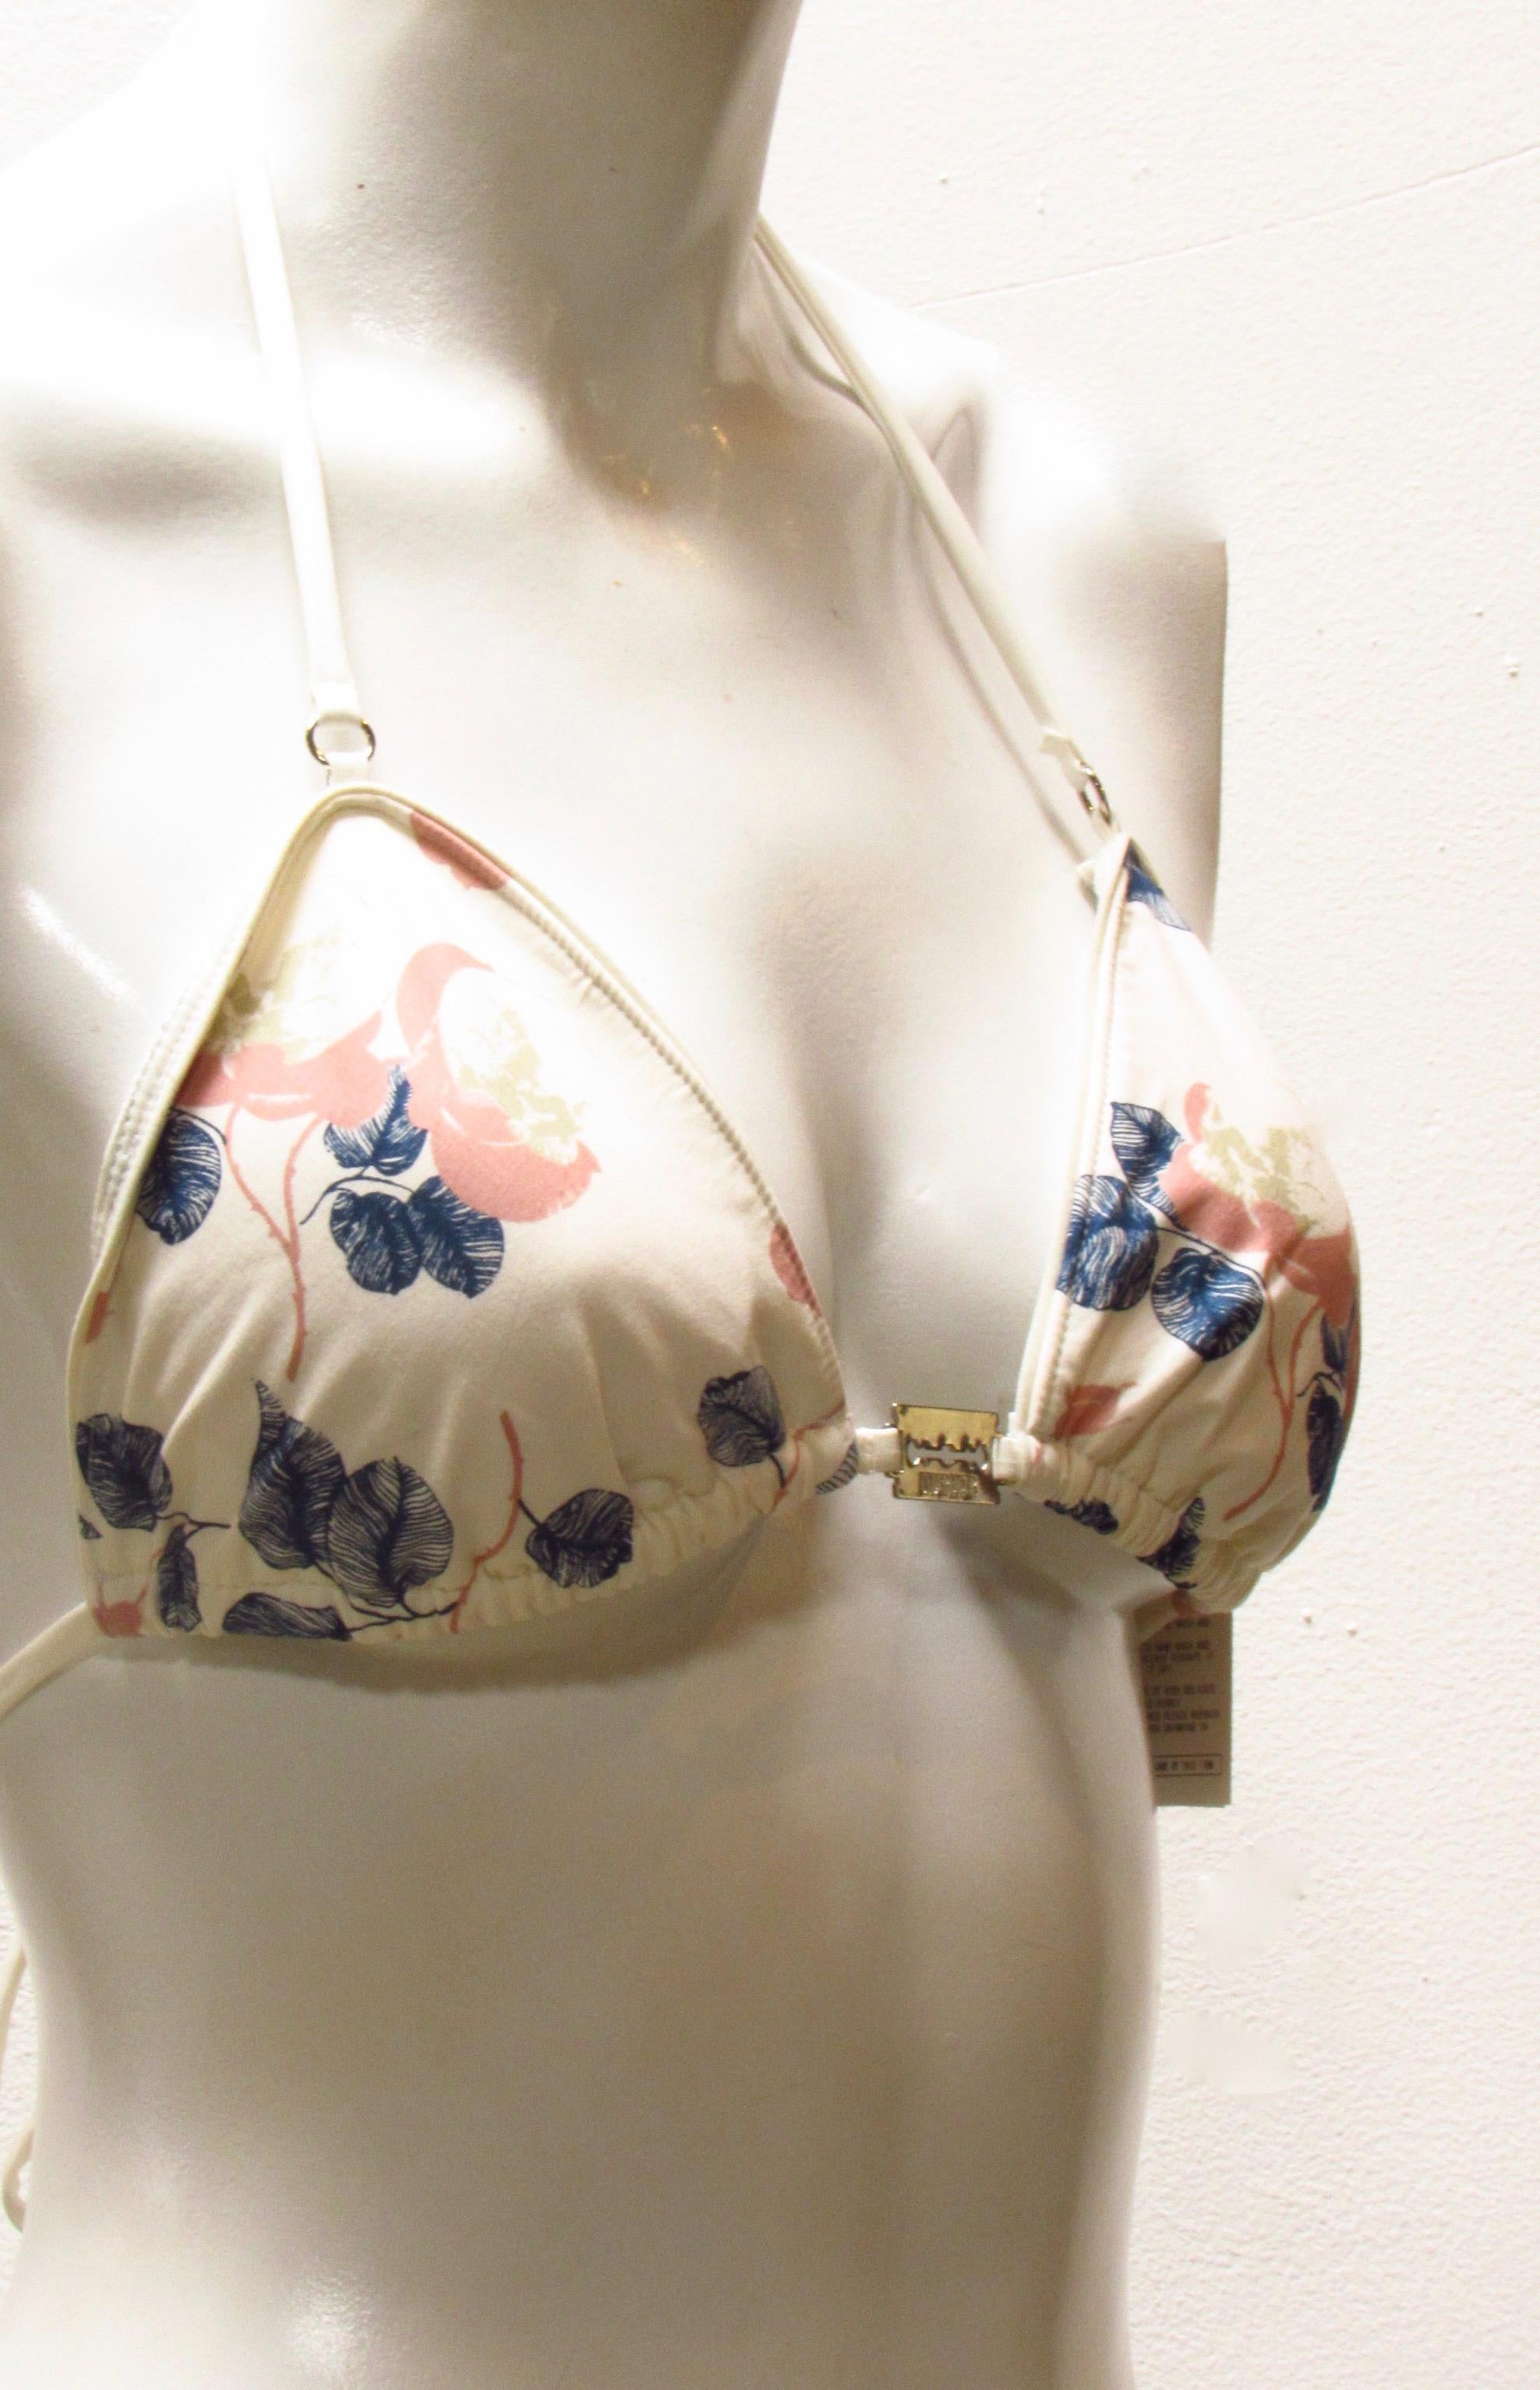 Cream colored printed string bikini from Undercover with brass buckles. 